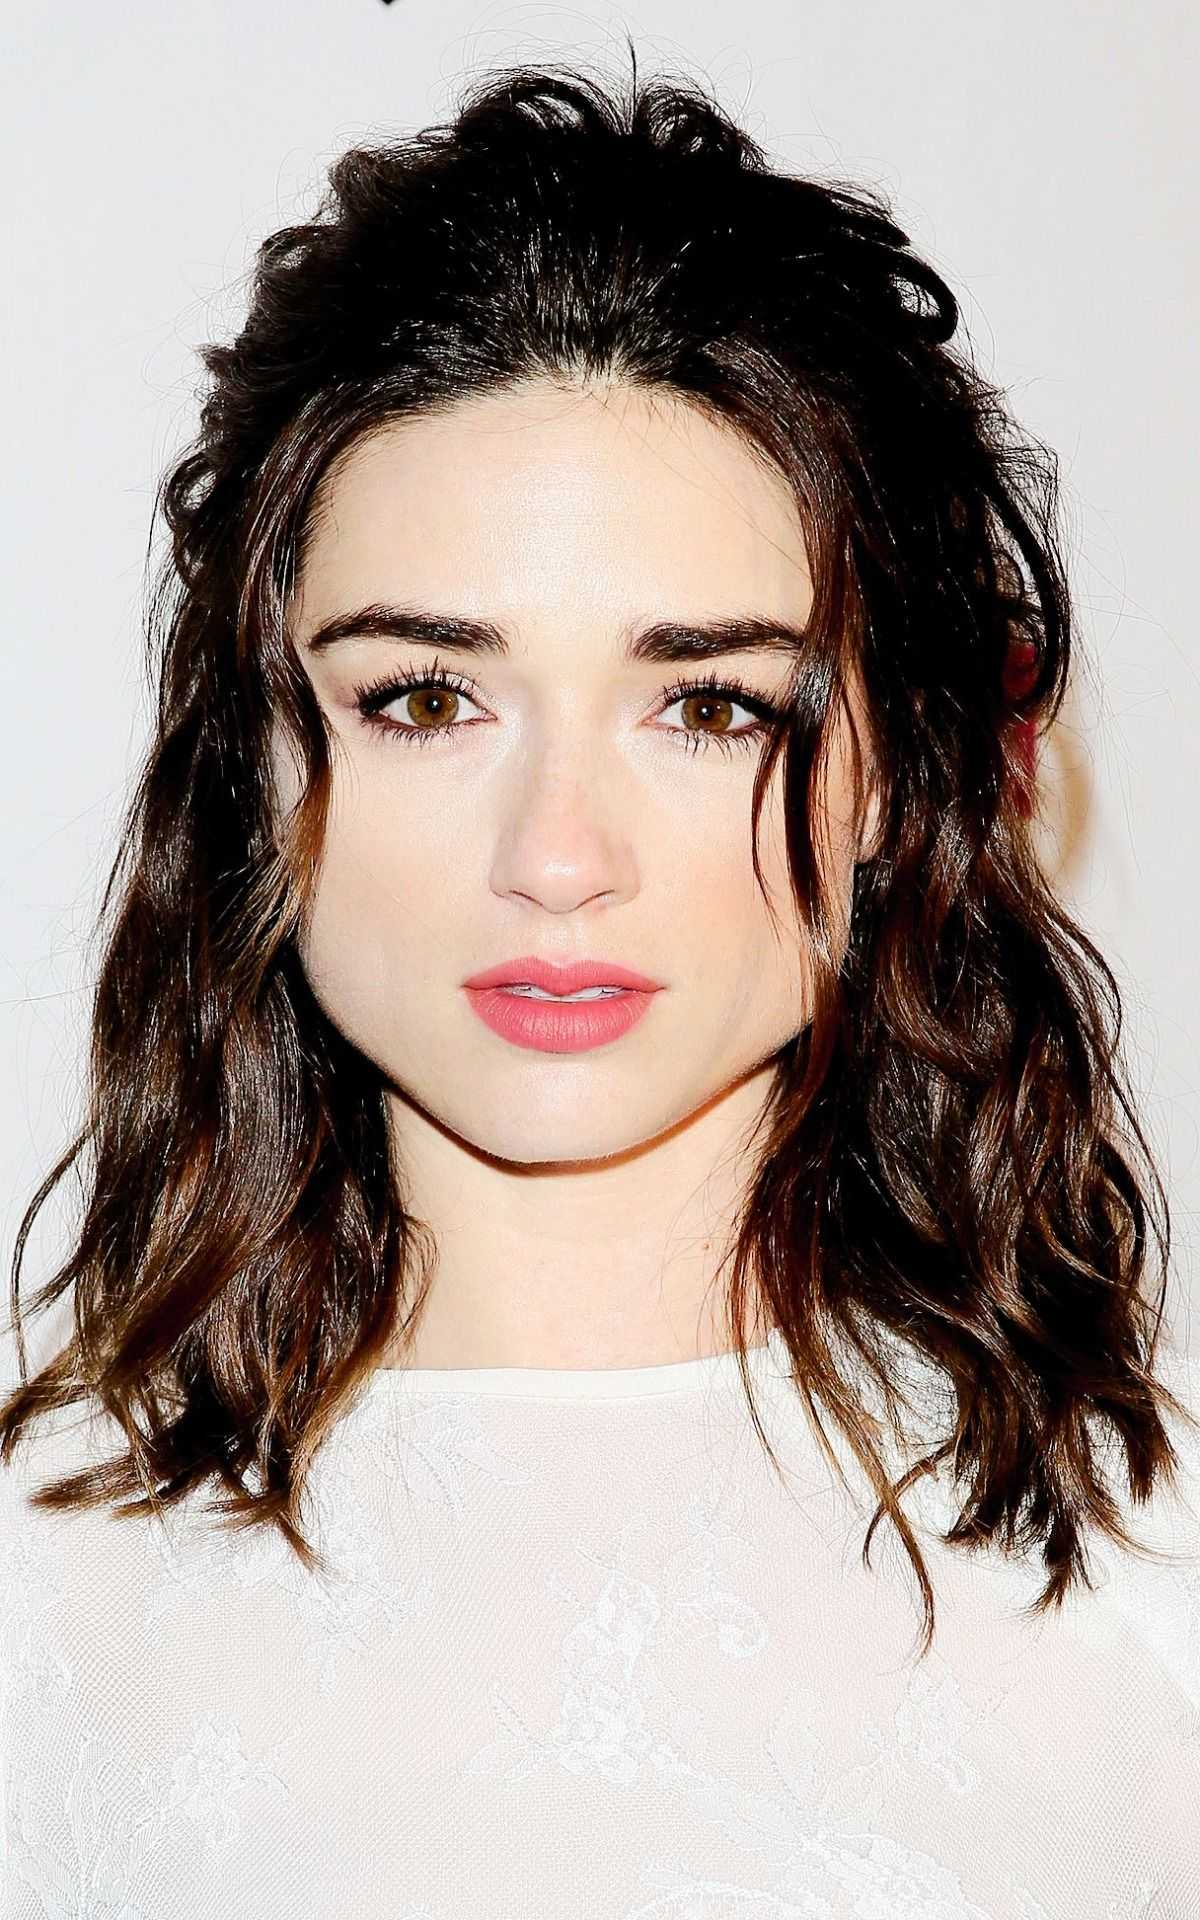 70+ Hot Pictures Of Crystal Reed That Are Sure To Make You Her Biggest Fan 13